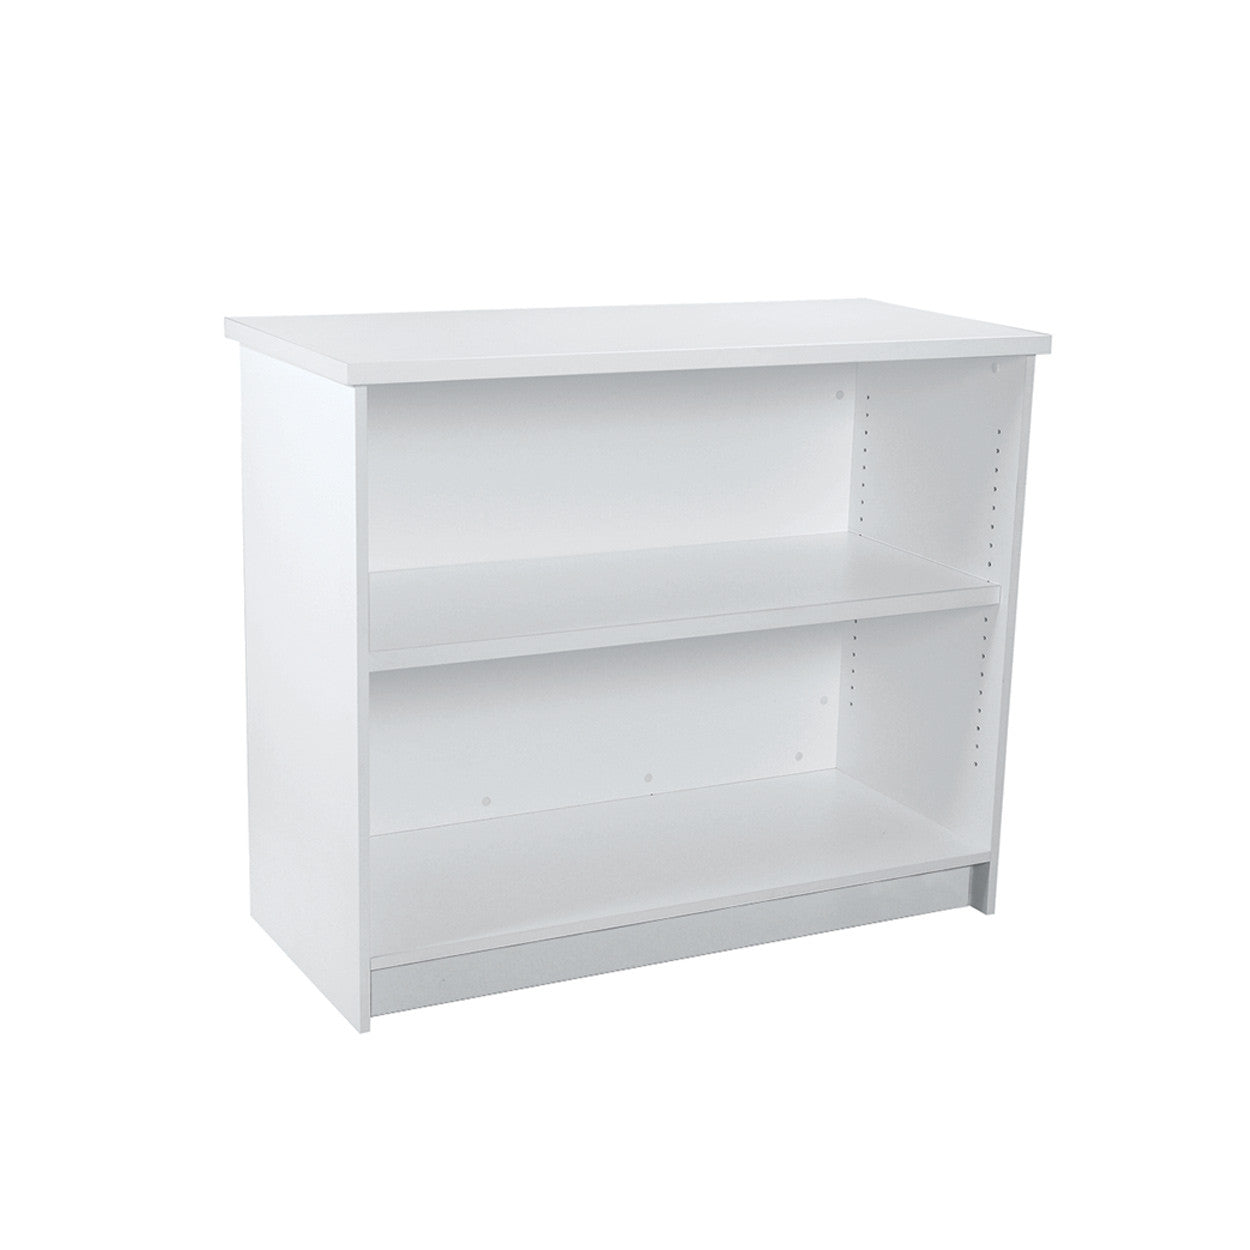 Counter with Timber Laminate and Adjustable Shelves - White W1200 x D544 x H1000